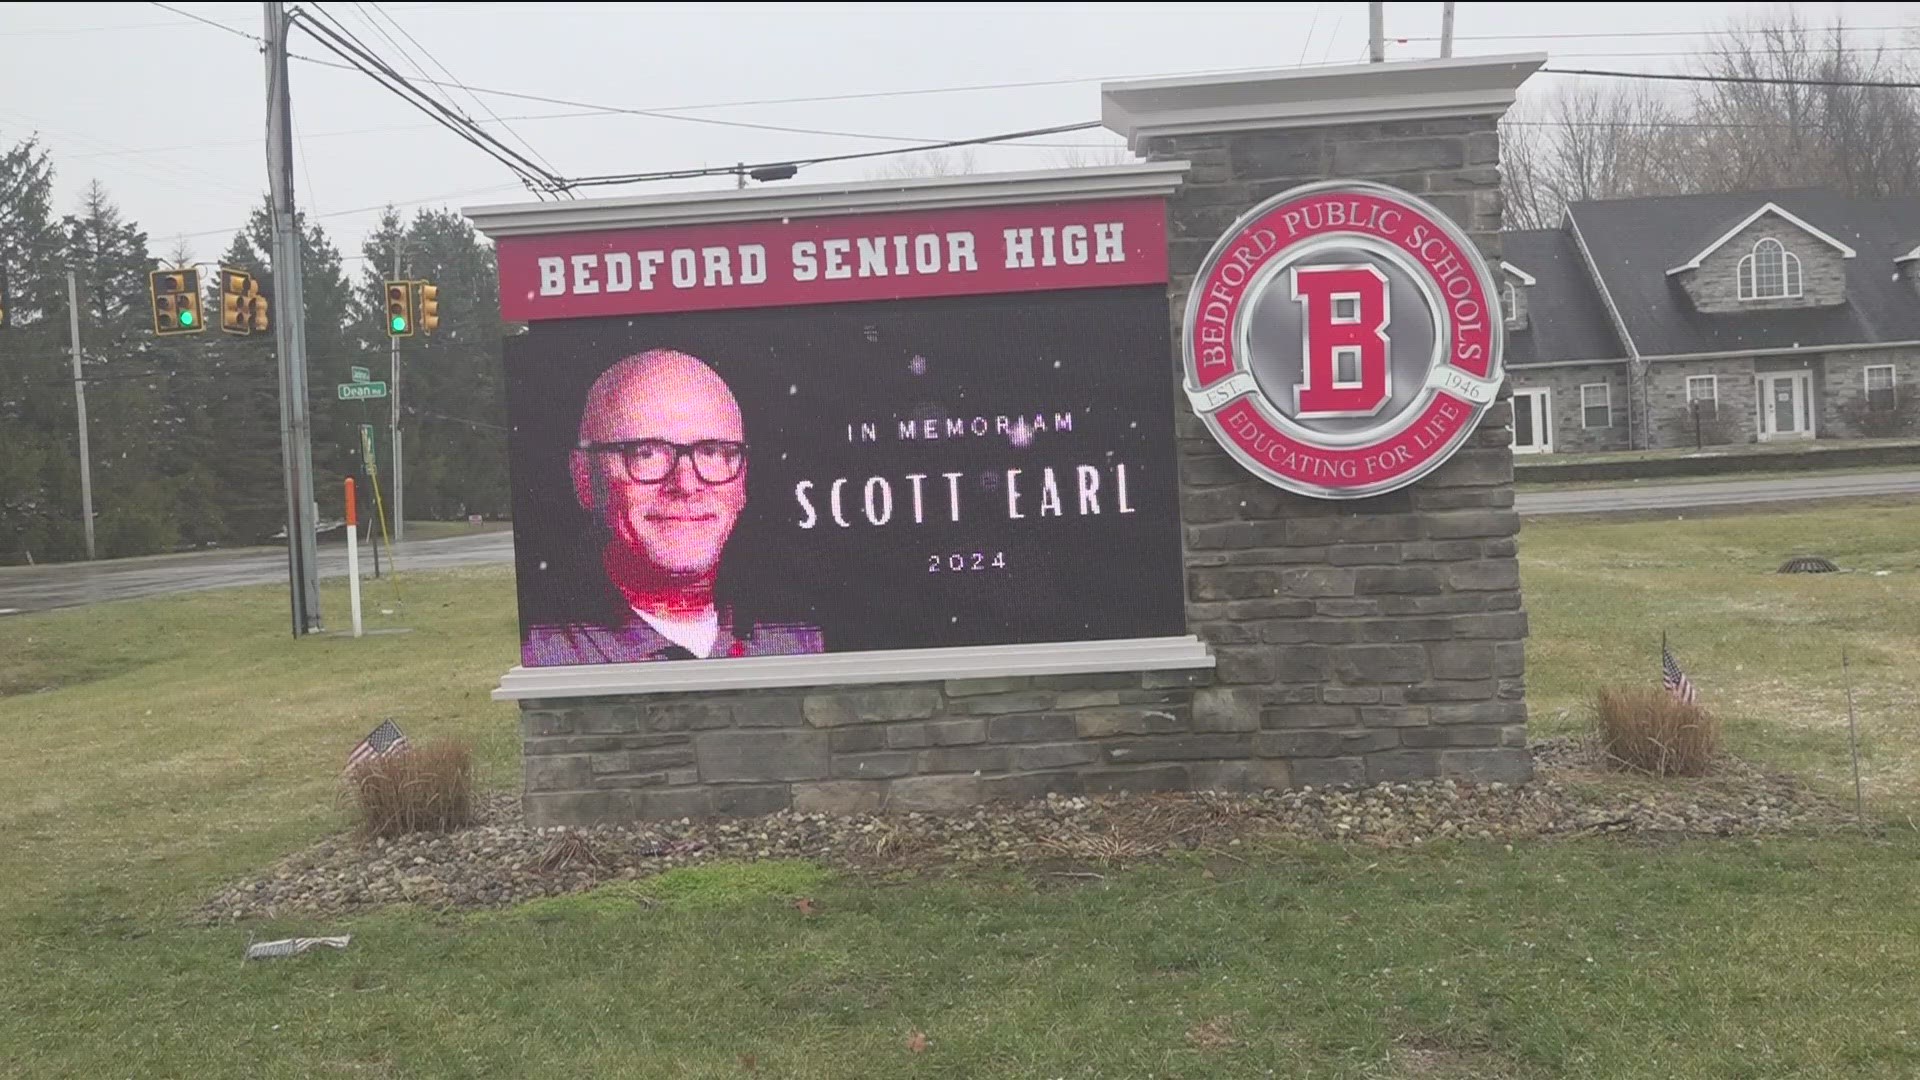 Scott Earl, an 11th grade English teacher and cross country coach, unexpectedly passed away early Tuesday morning.